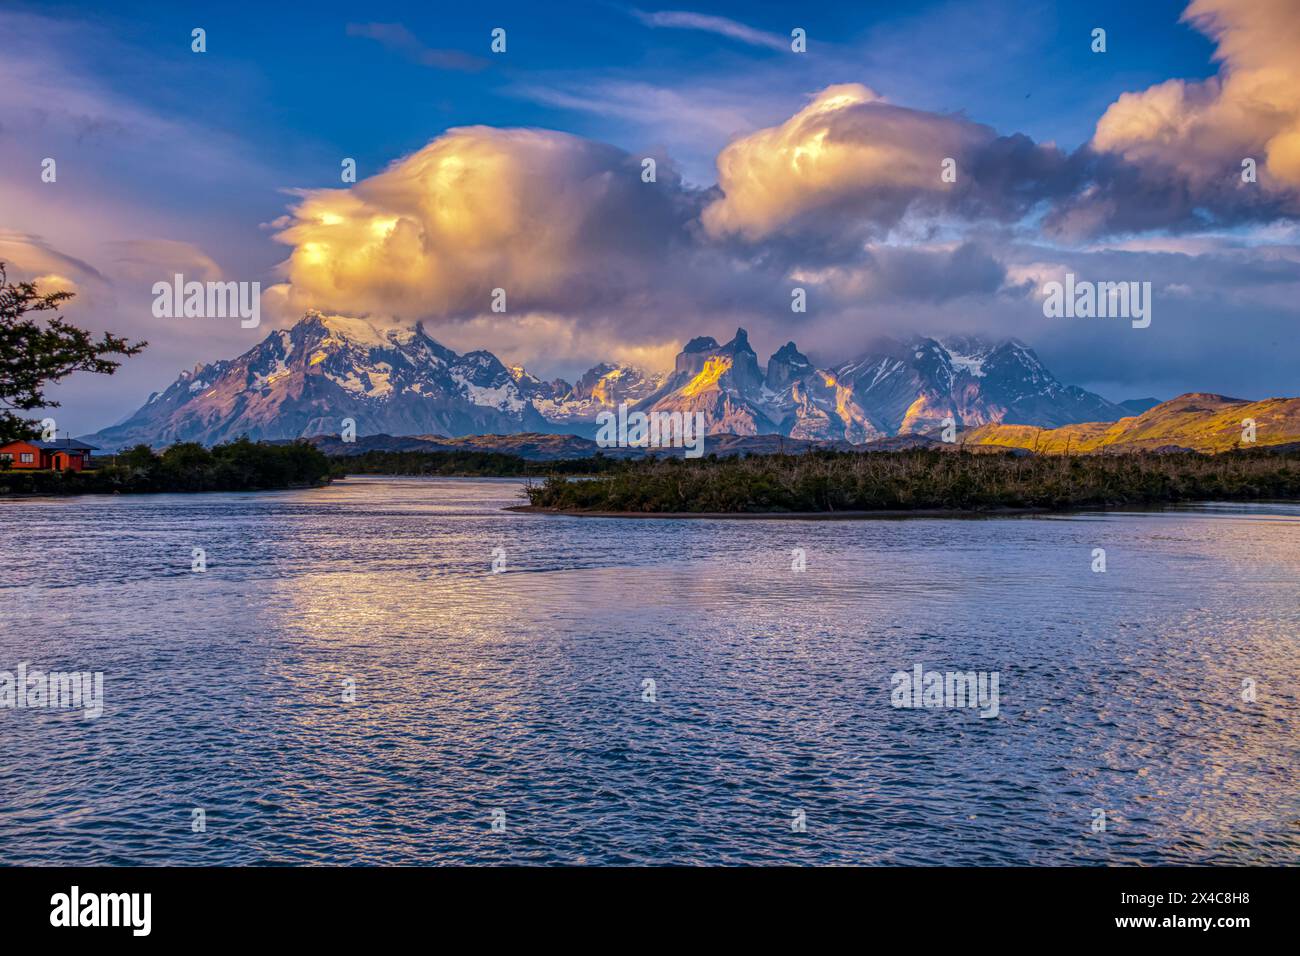 Chile, Torres del Paine National Park. Landscape with Serrano River and Cuernos del Paine mountains. Stock Photo